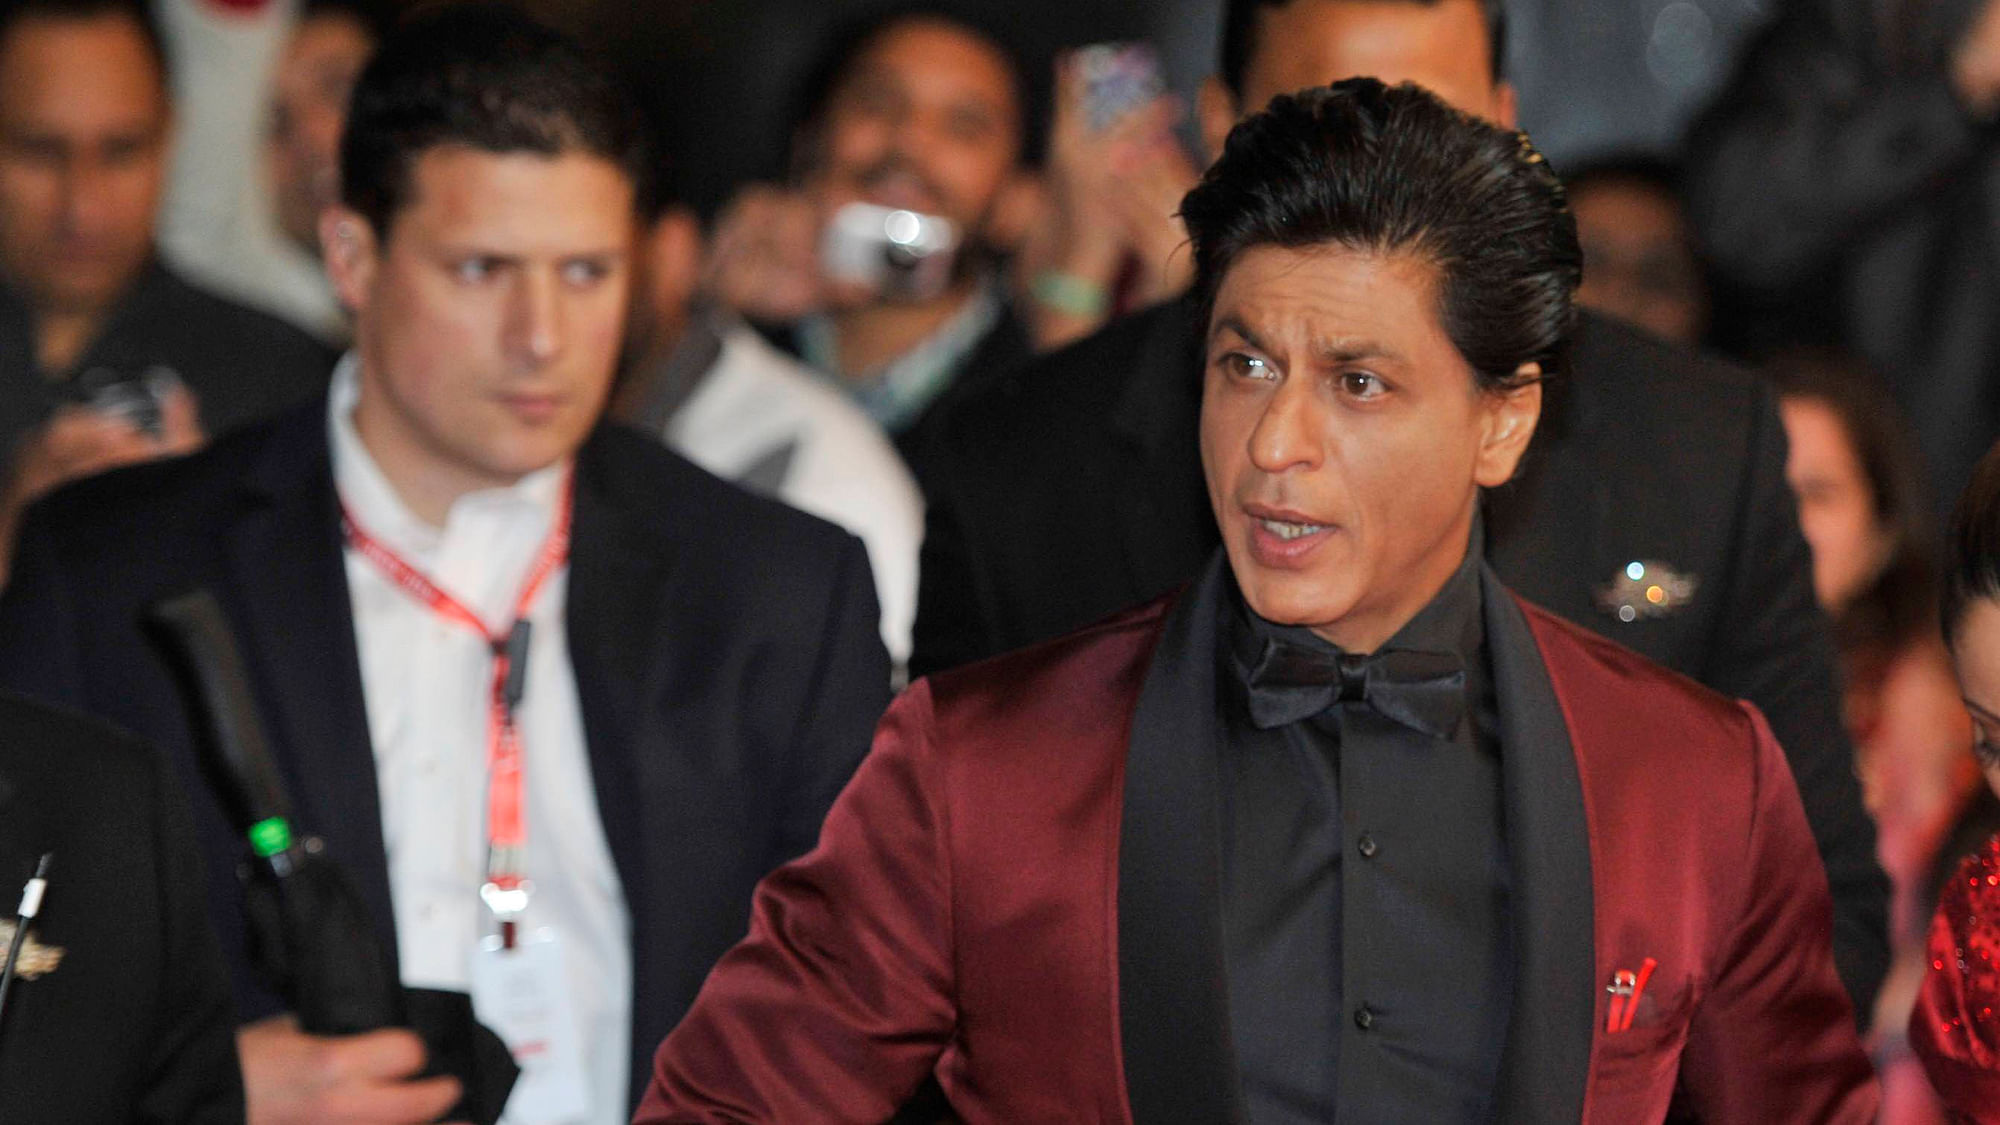 Shah Rukh Khan receives a special gift (Photo: Reuters)